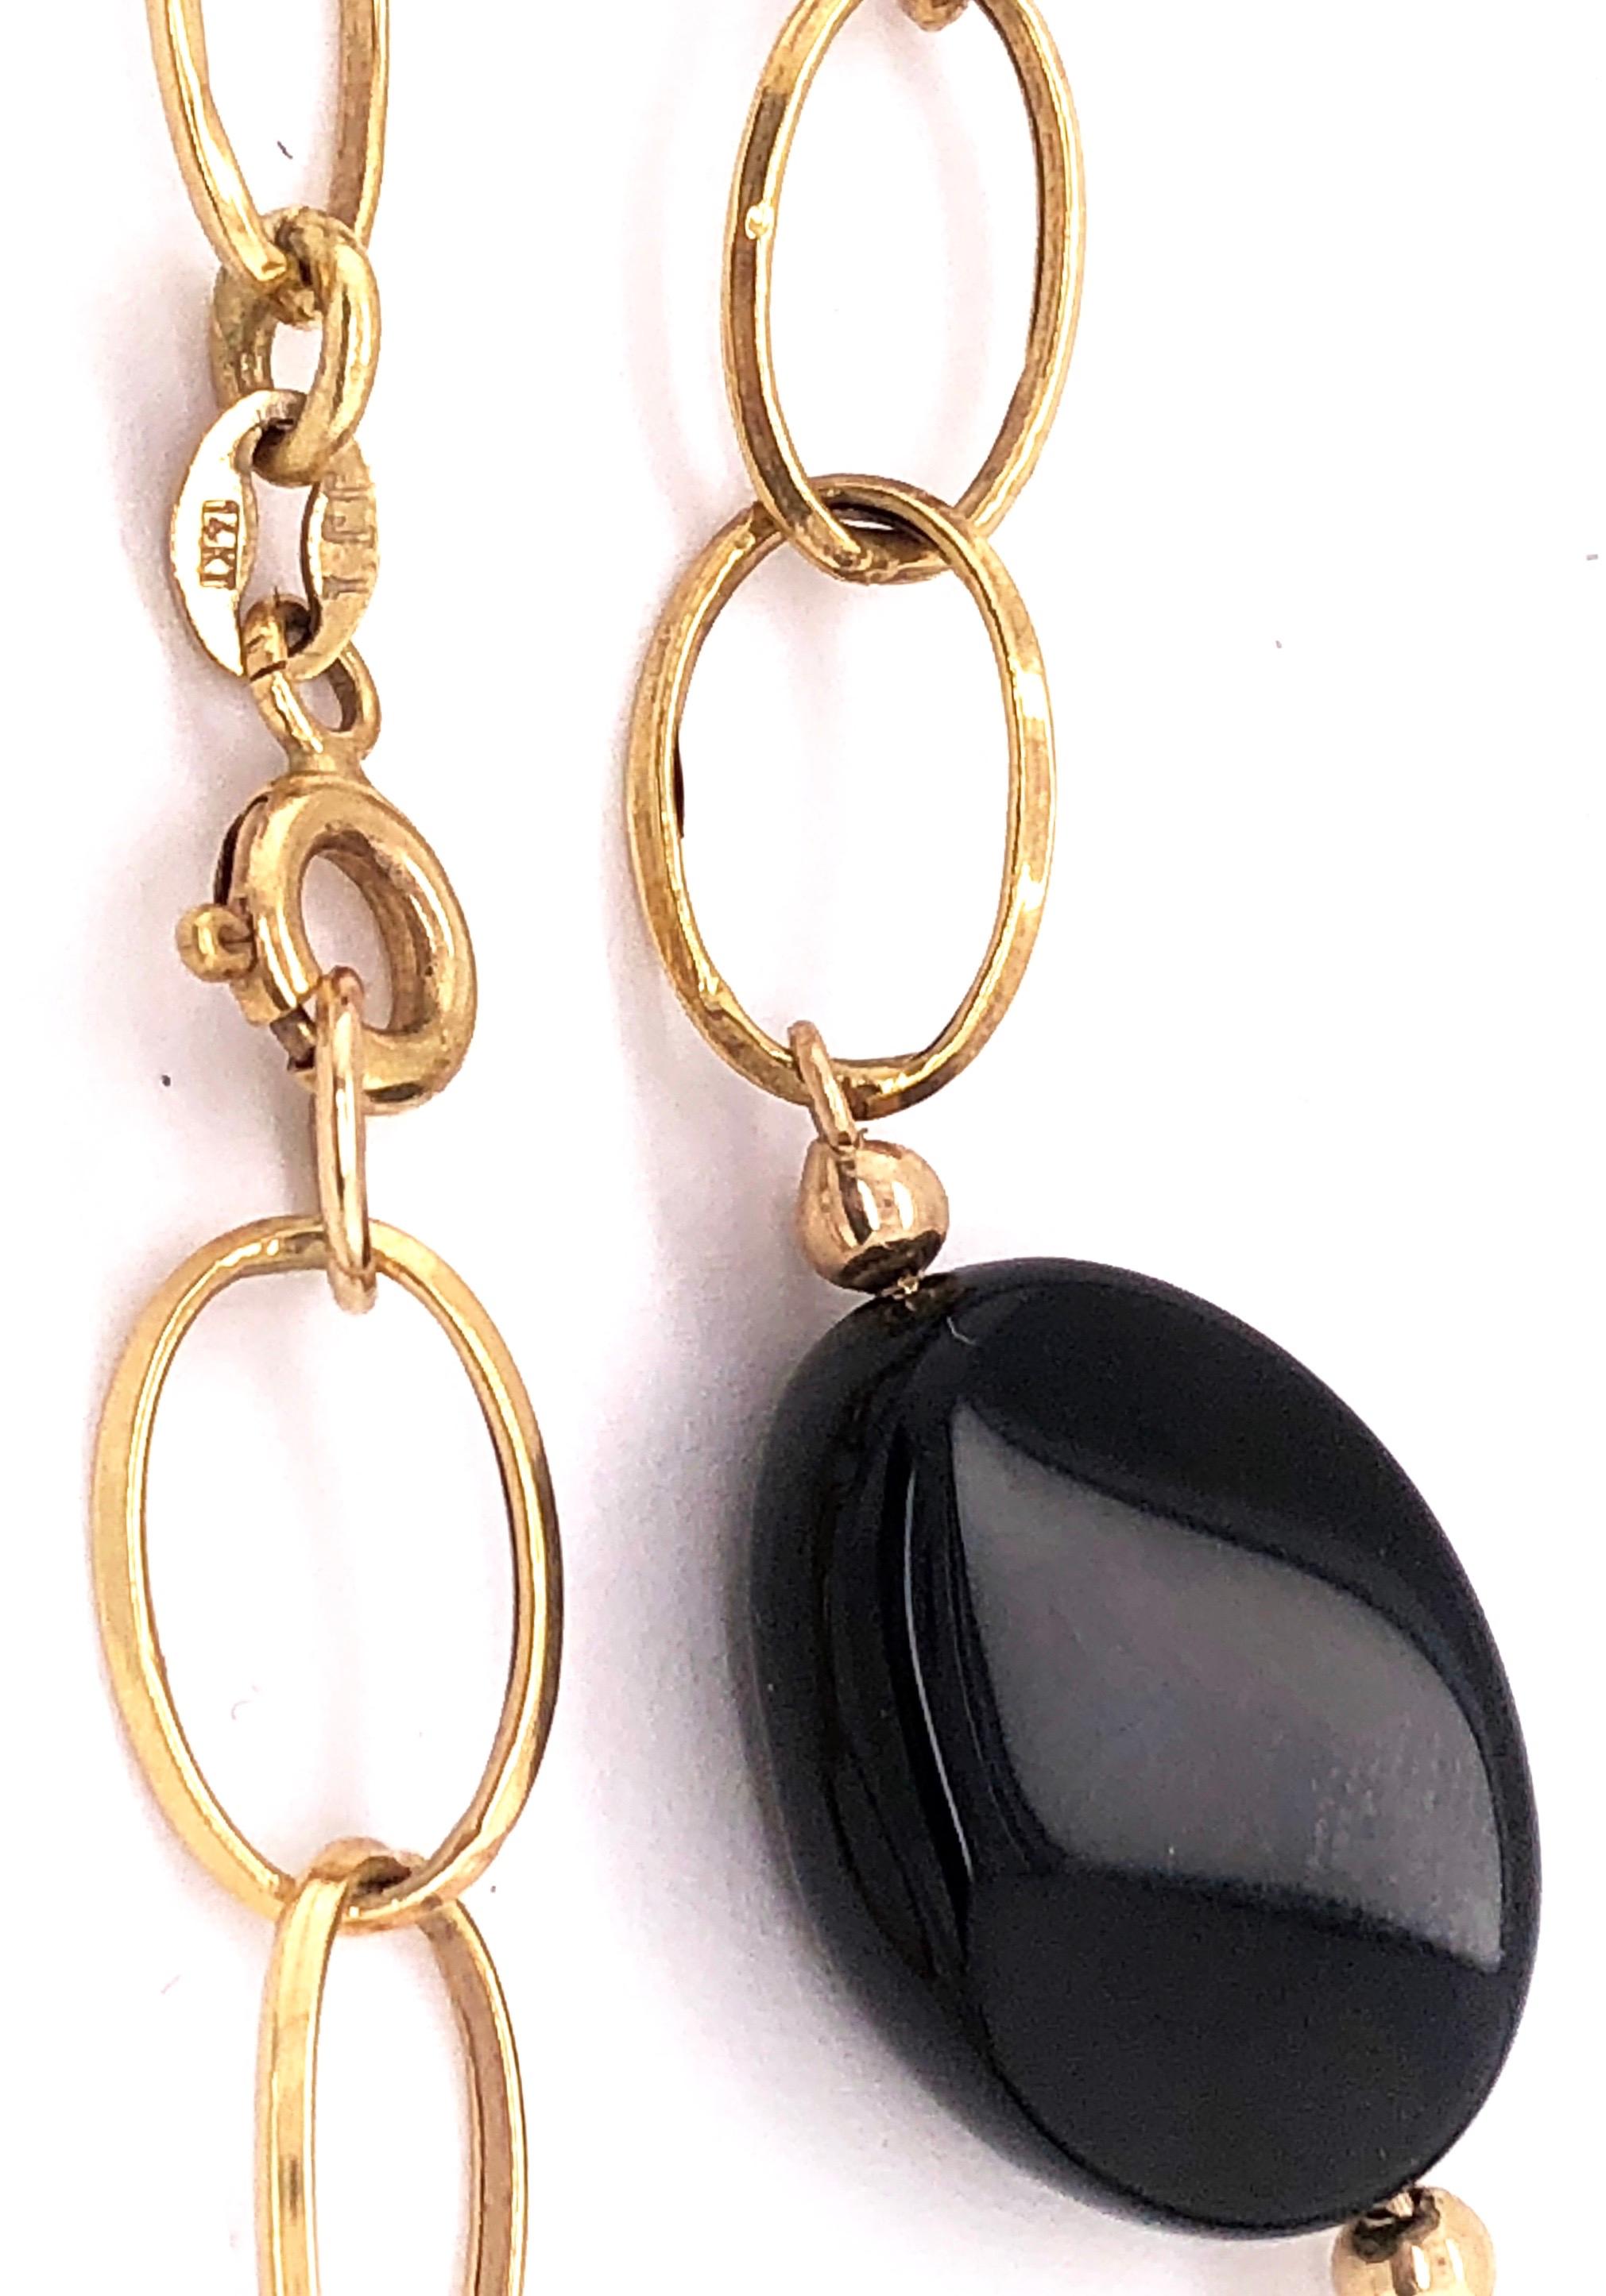 14 Karat Yellow Gold Link Necklace with Ebony Stones 21.2 Grams Total For Sale 10